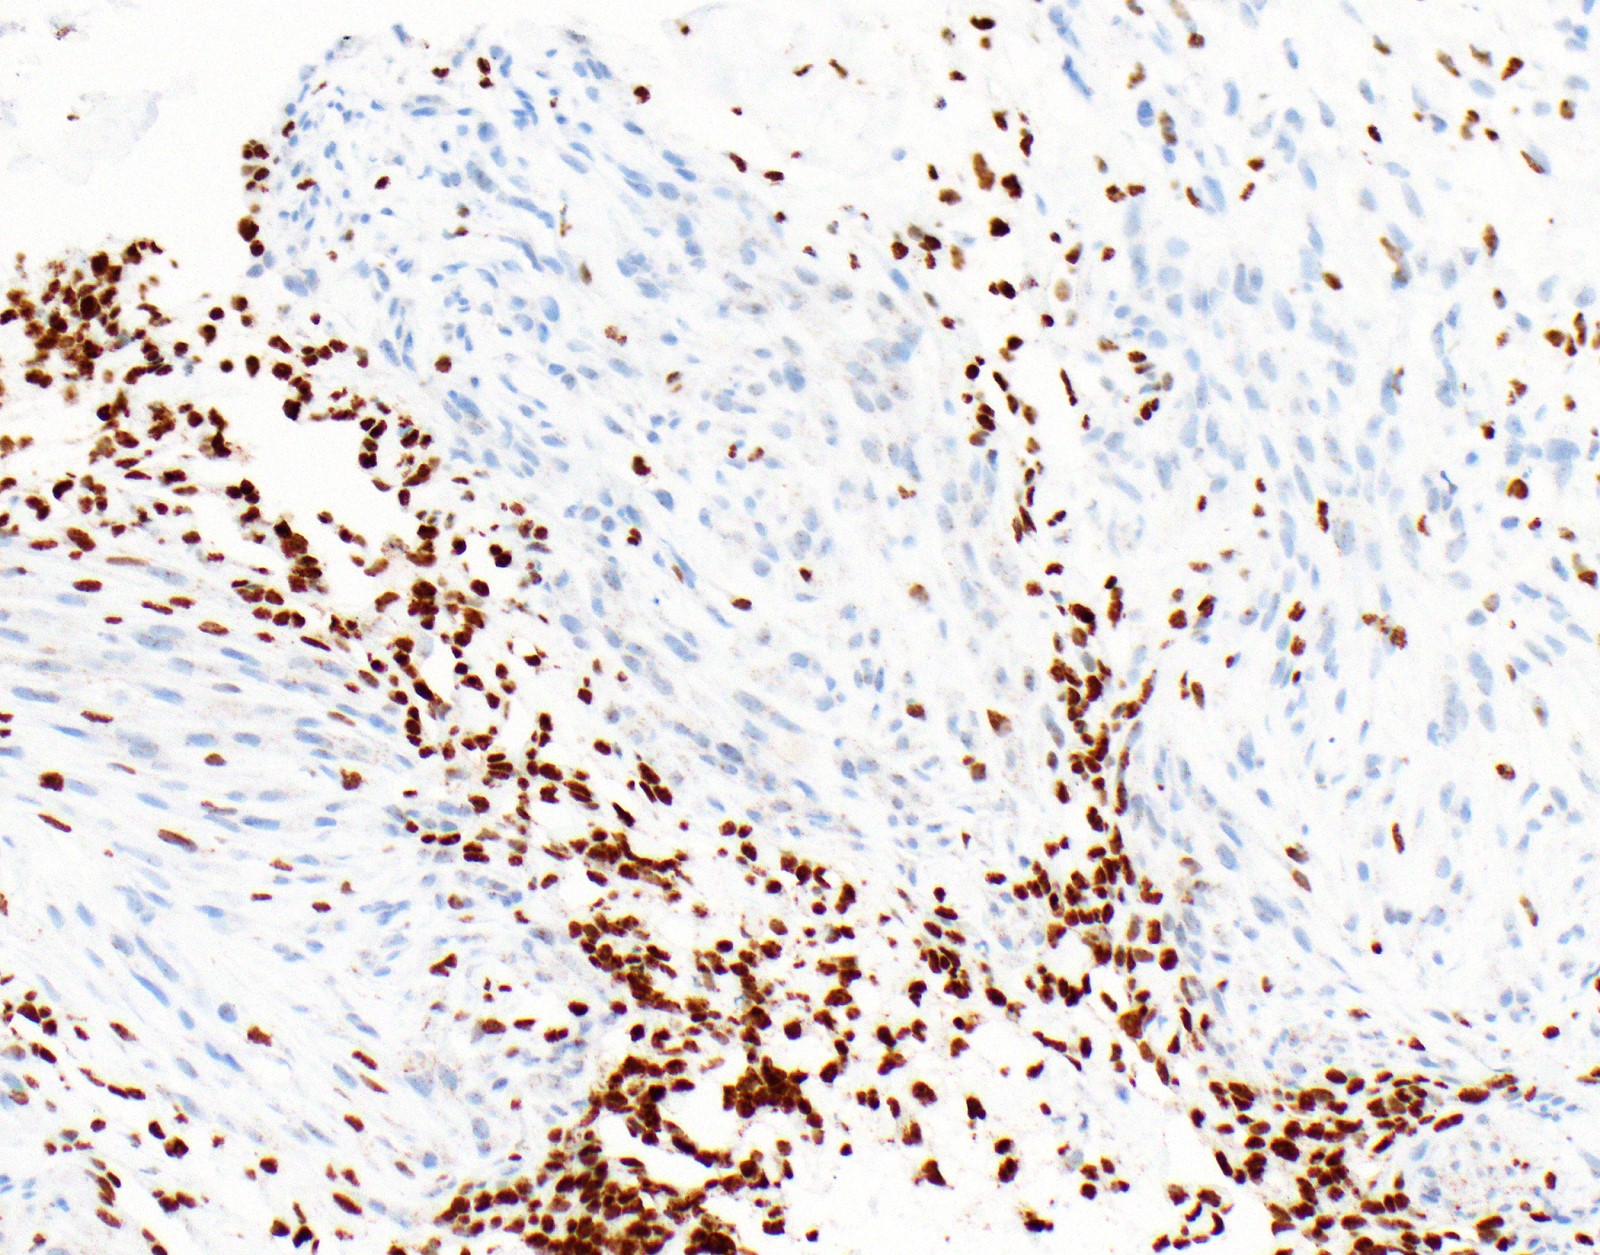 spindle cell mesothelioma pathology outlines